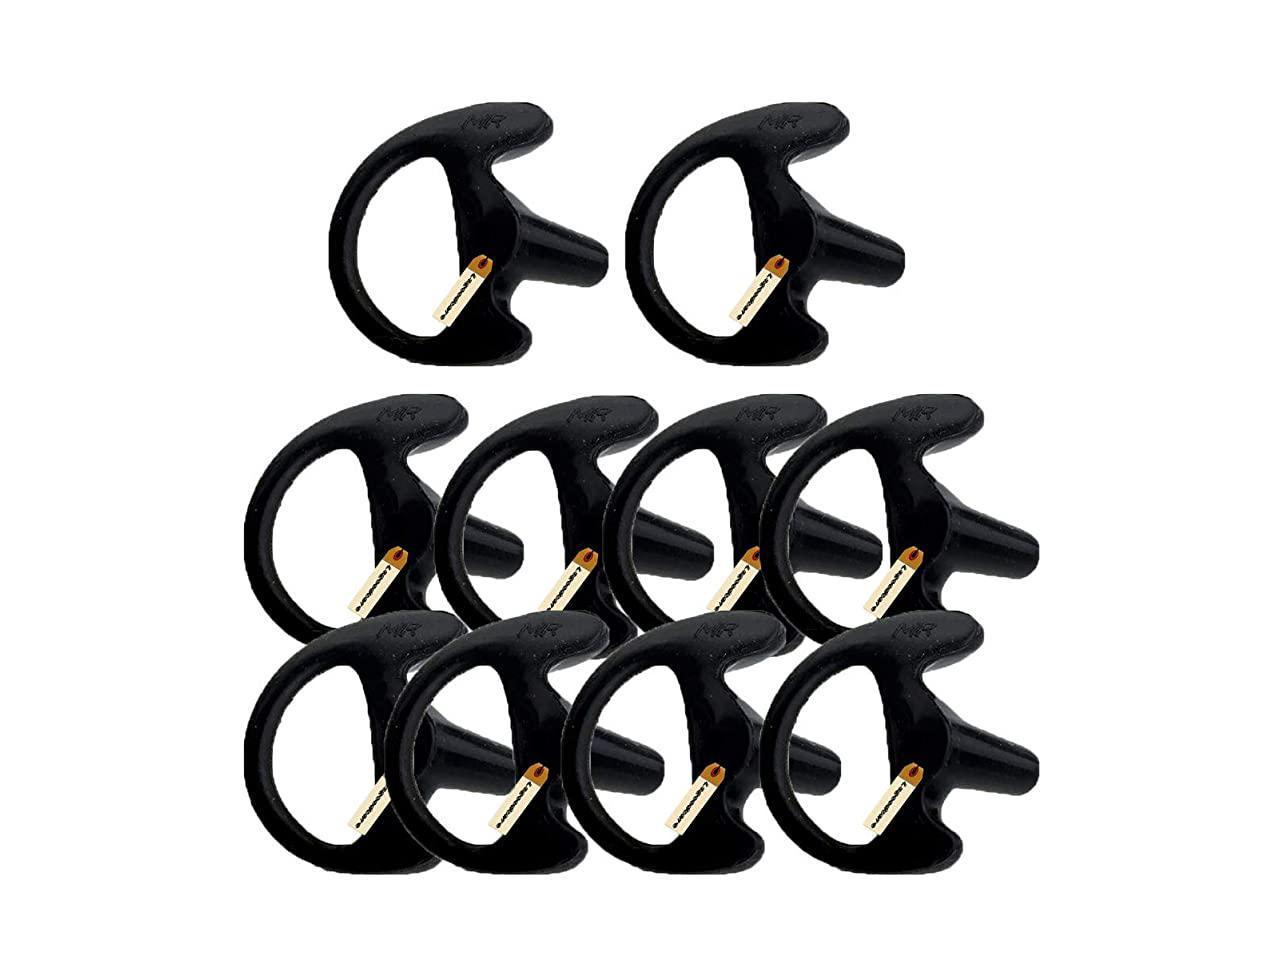 Lsgoodcare Soft Ear Piece 10 Pairs Replacement Earmold Earbud Right Ear for Two Way Radio Acoustic Coil Tube Earpiece Silicone Walkie Talkie Earmould Ear Buds Black Medium 